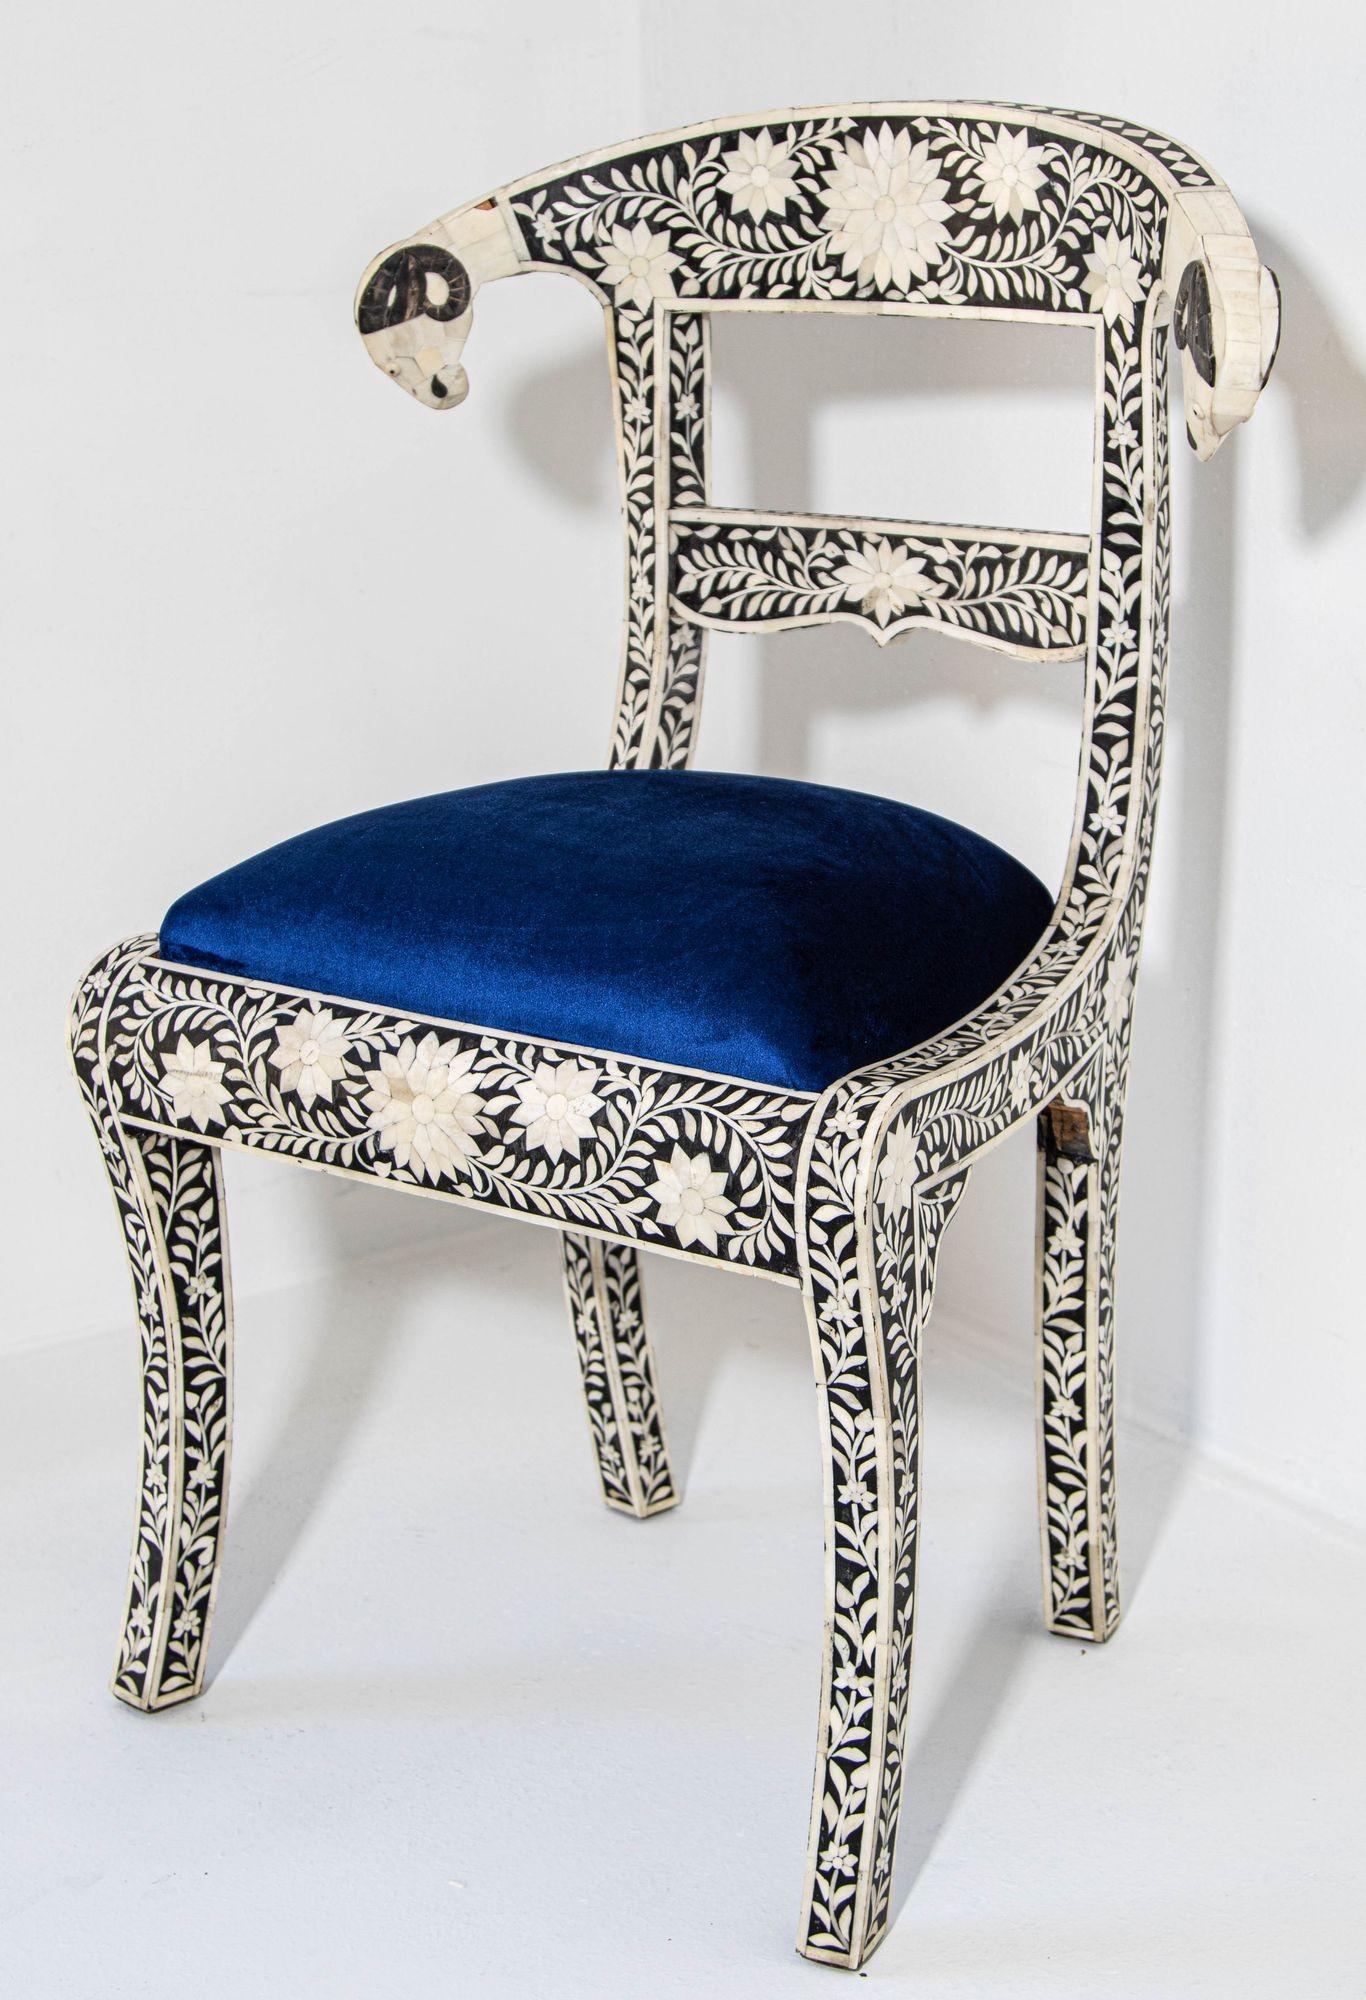 Antique Anglo-Indian Side Chairs with Ram's Head Bone Inlay Royal Blue Seat Pair For Sale 14